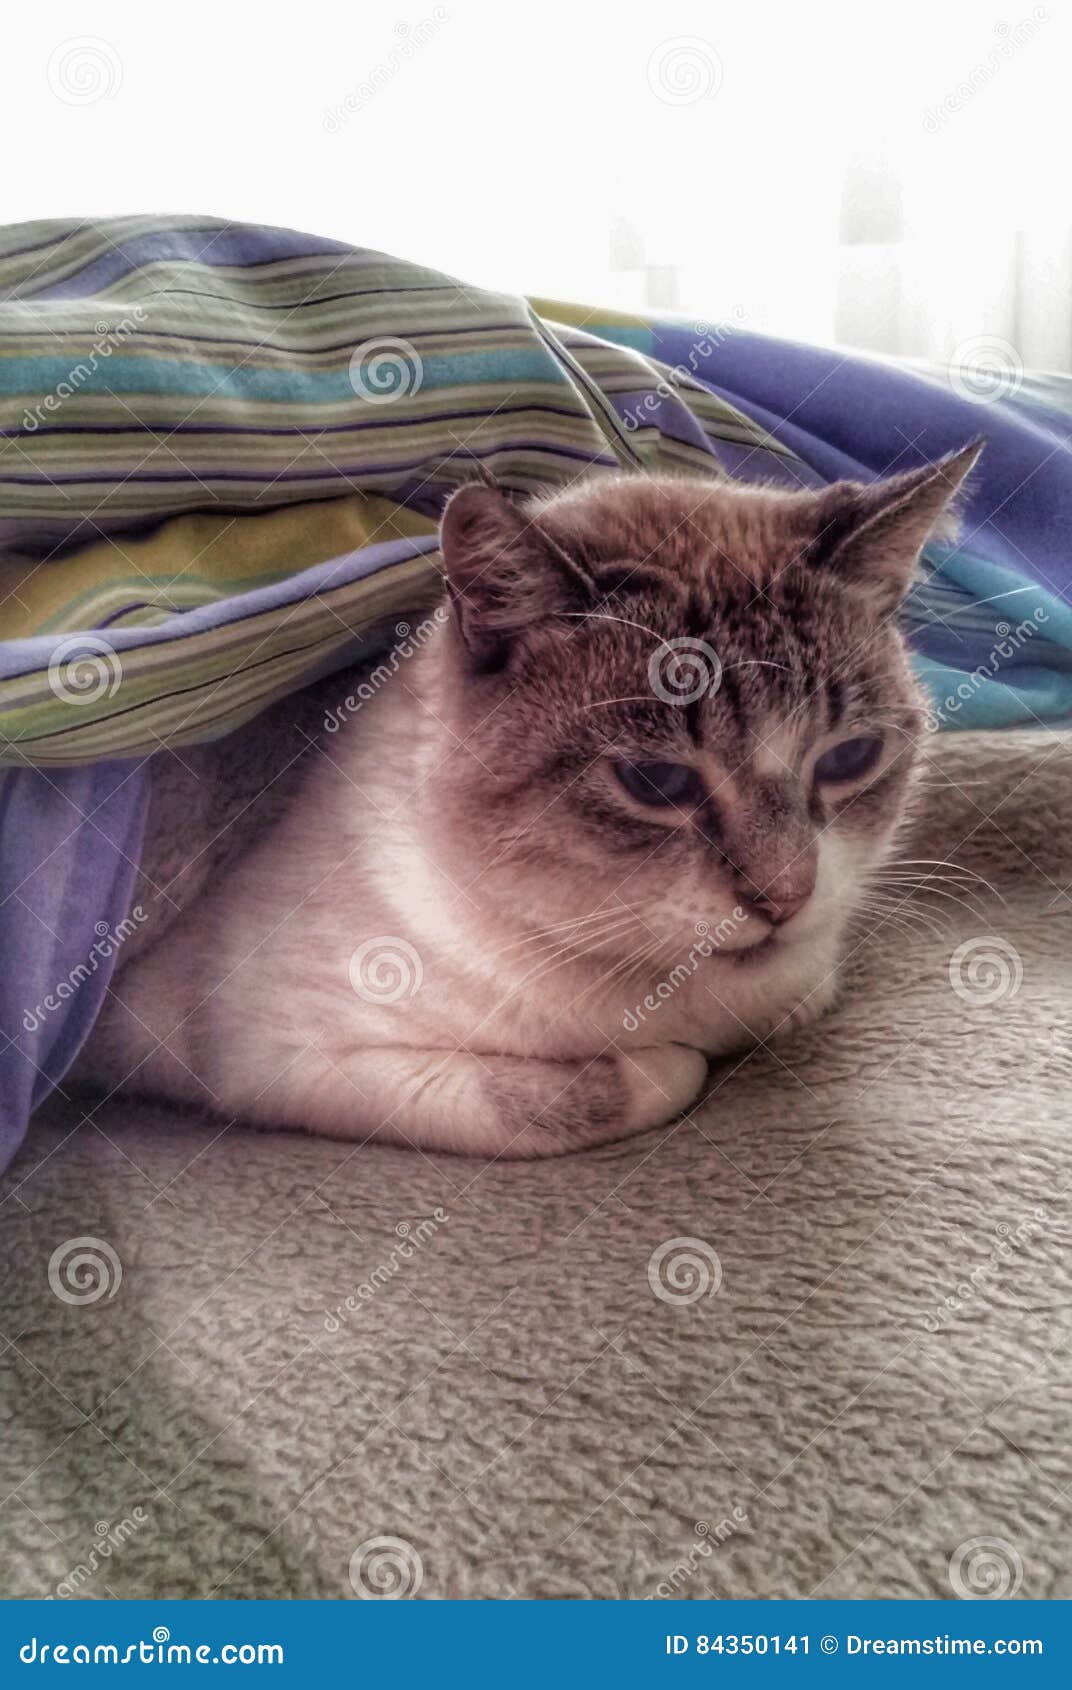 cat under sheets